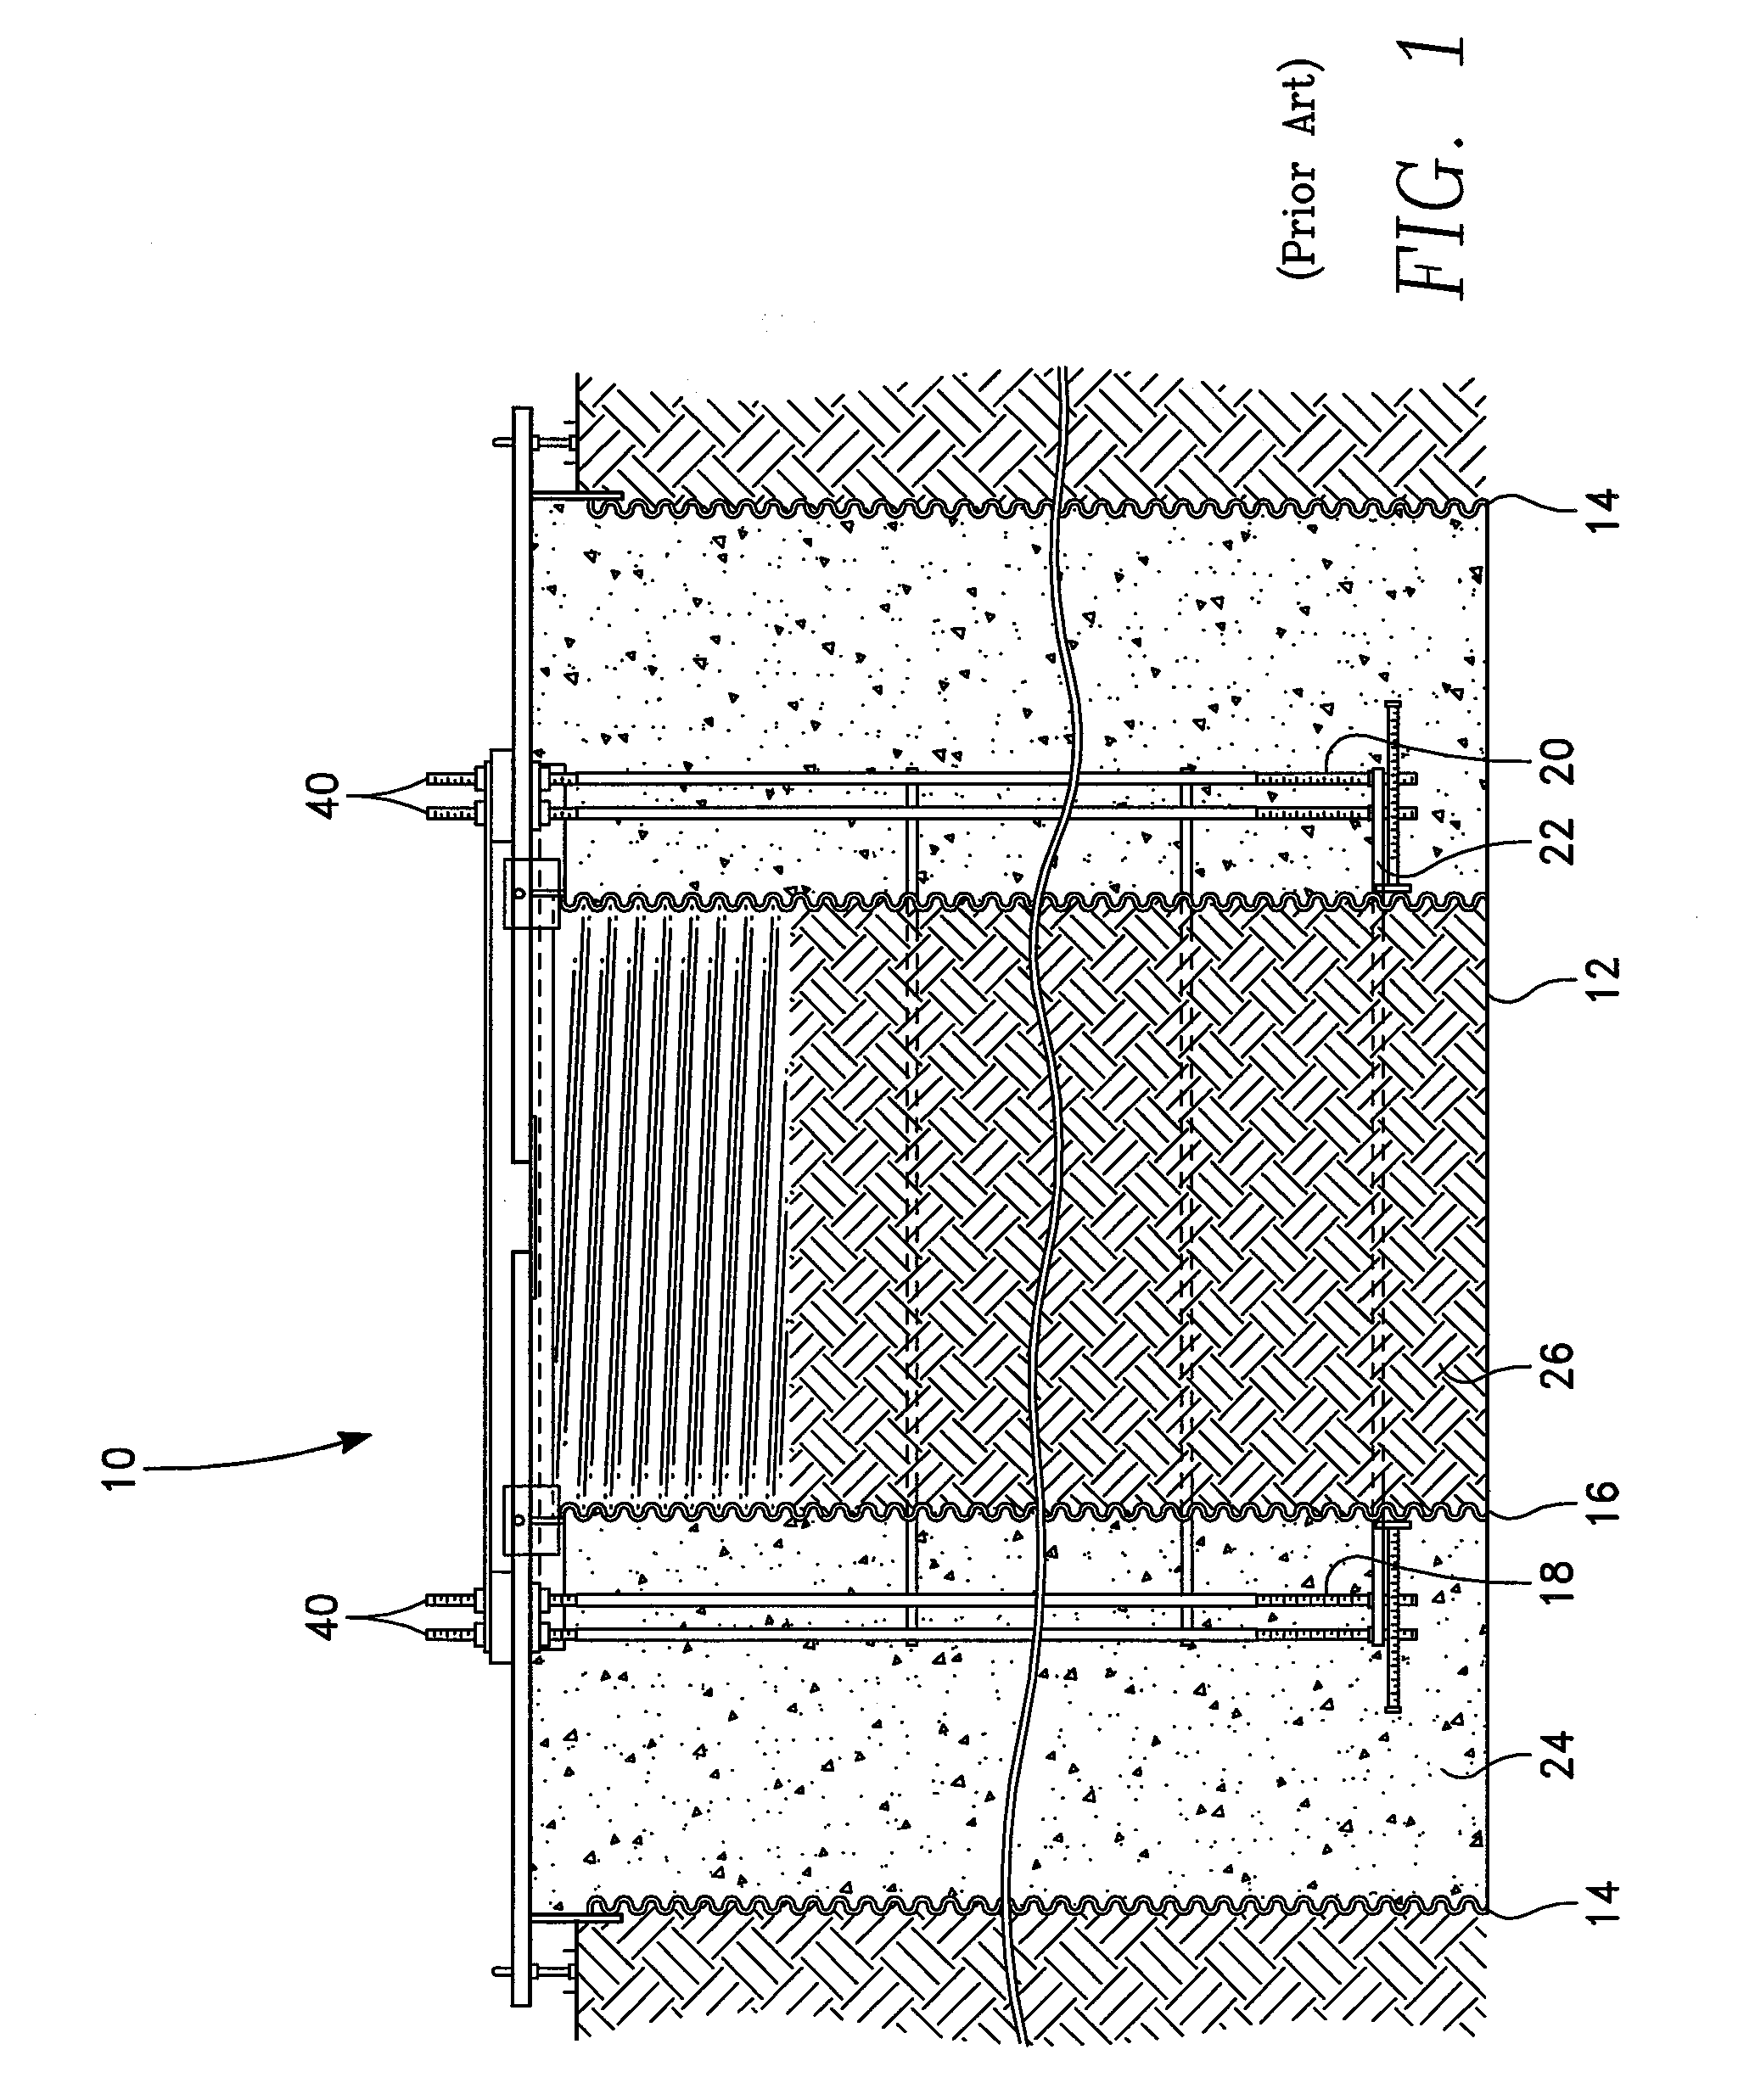 Apparatus and method for installing anchor bolts in a cylindrical pier foundation